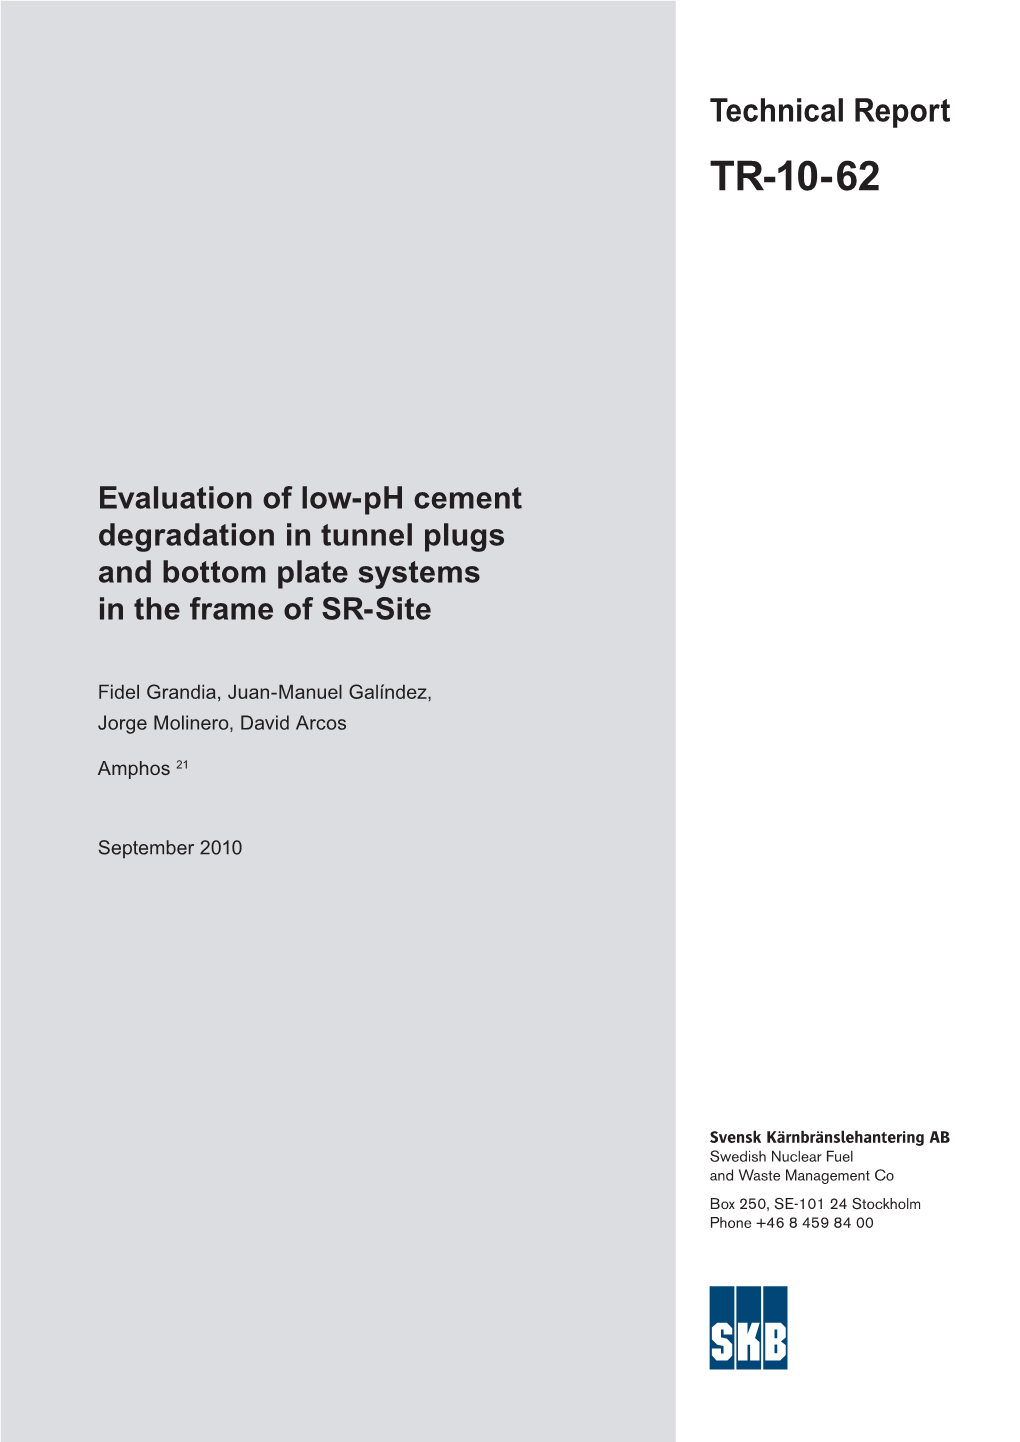 Evaluation of Low-Ph Cement Degradation in Tunnel Plugs and Bottom Plate Systems in the Frame of SR-Site